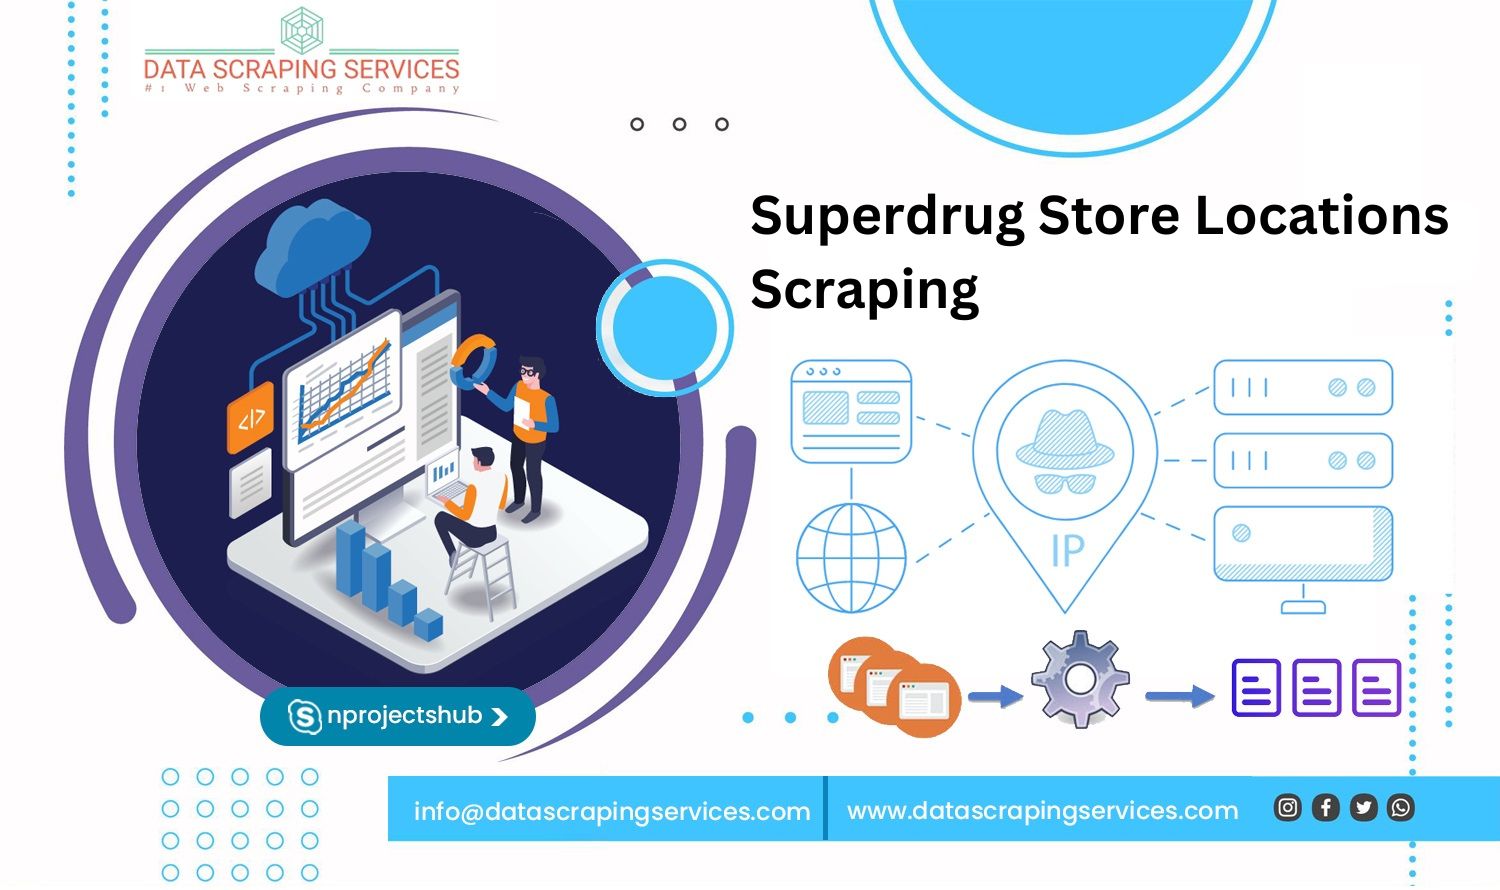 Superdrug Store Locations Scraping